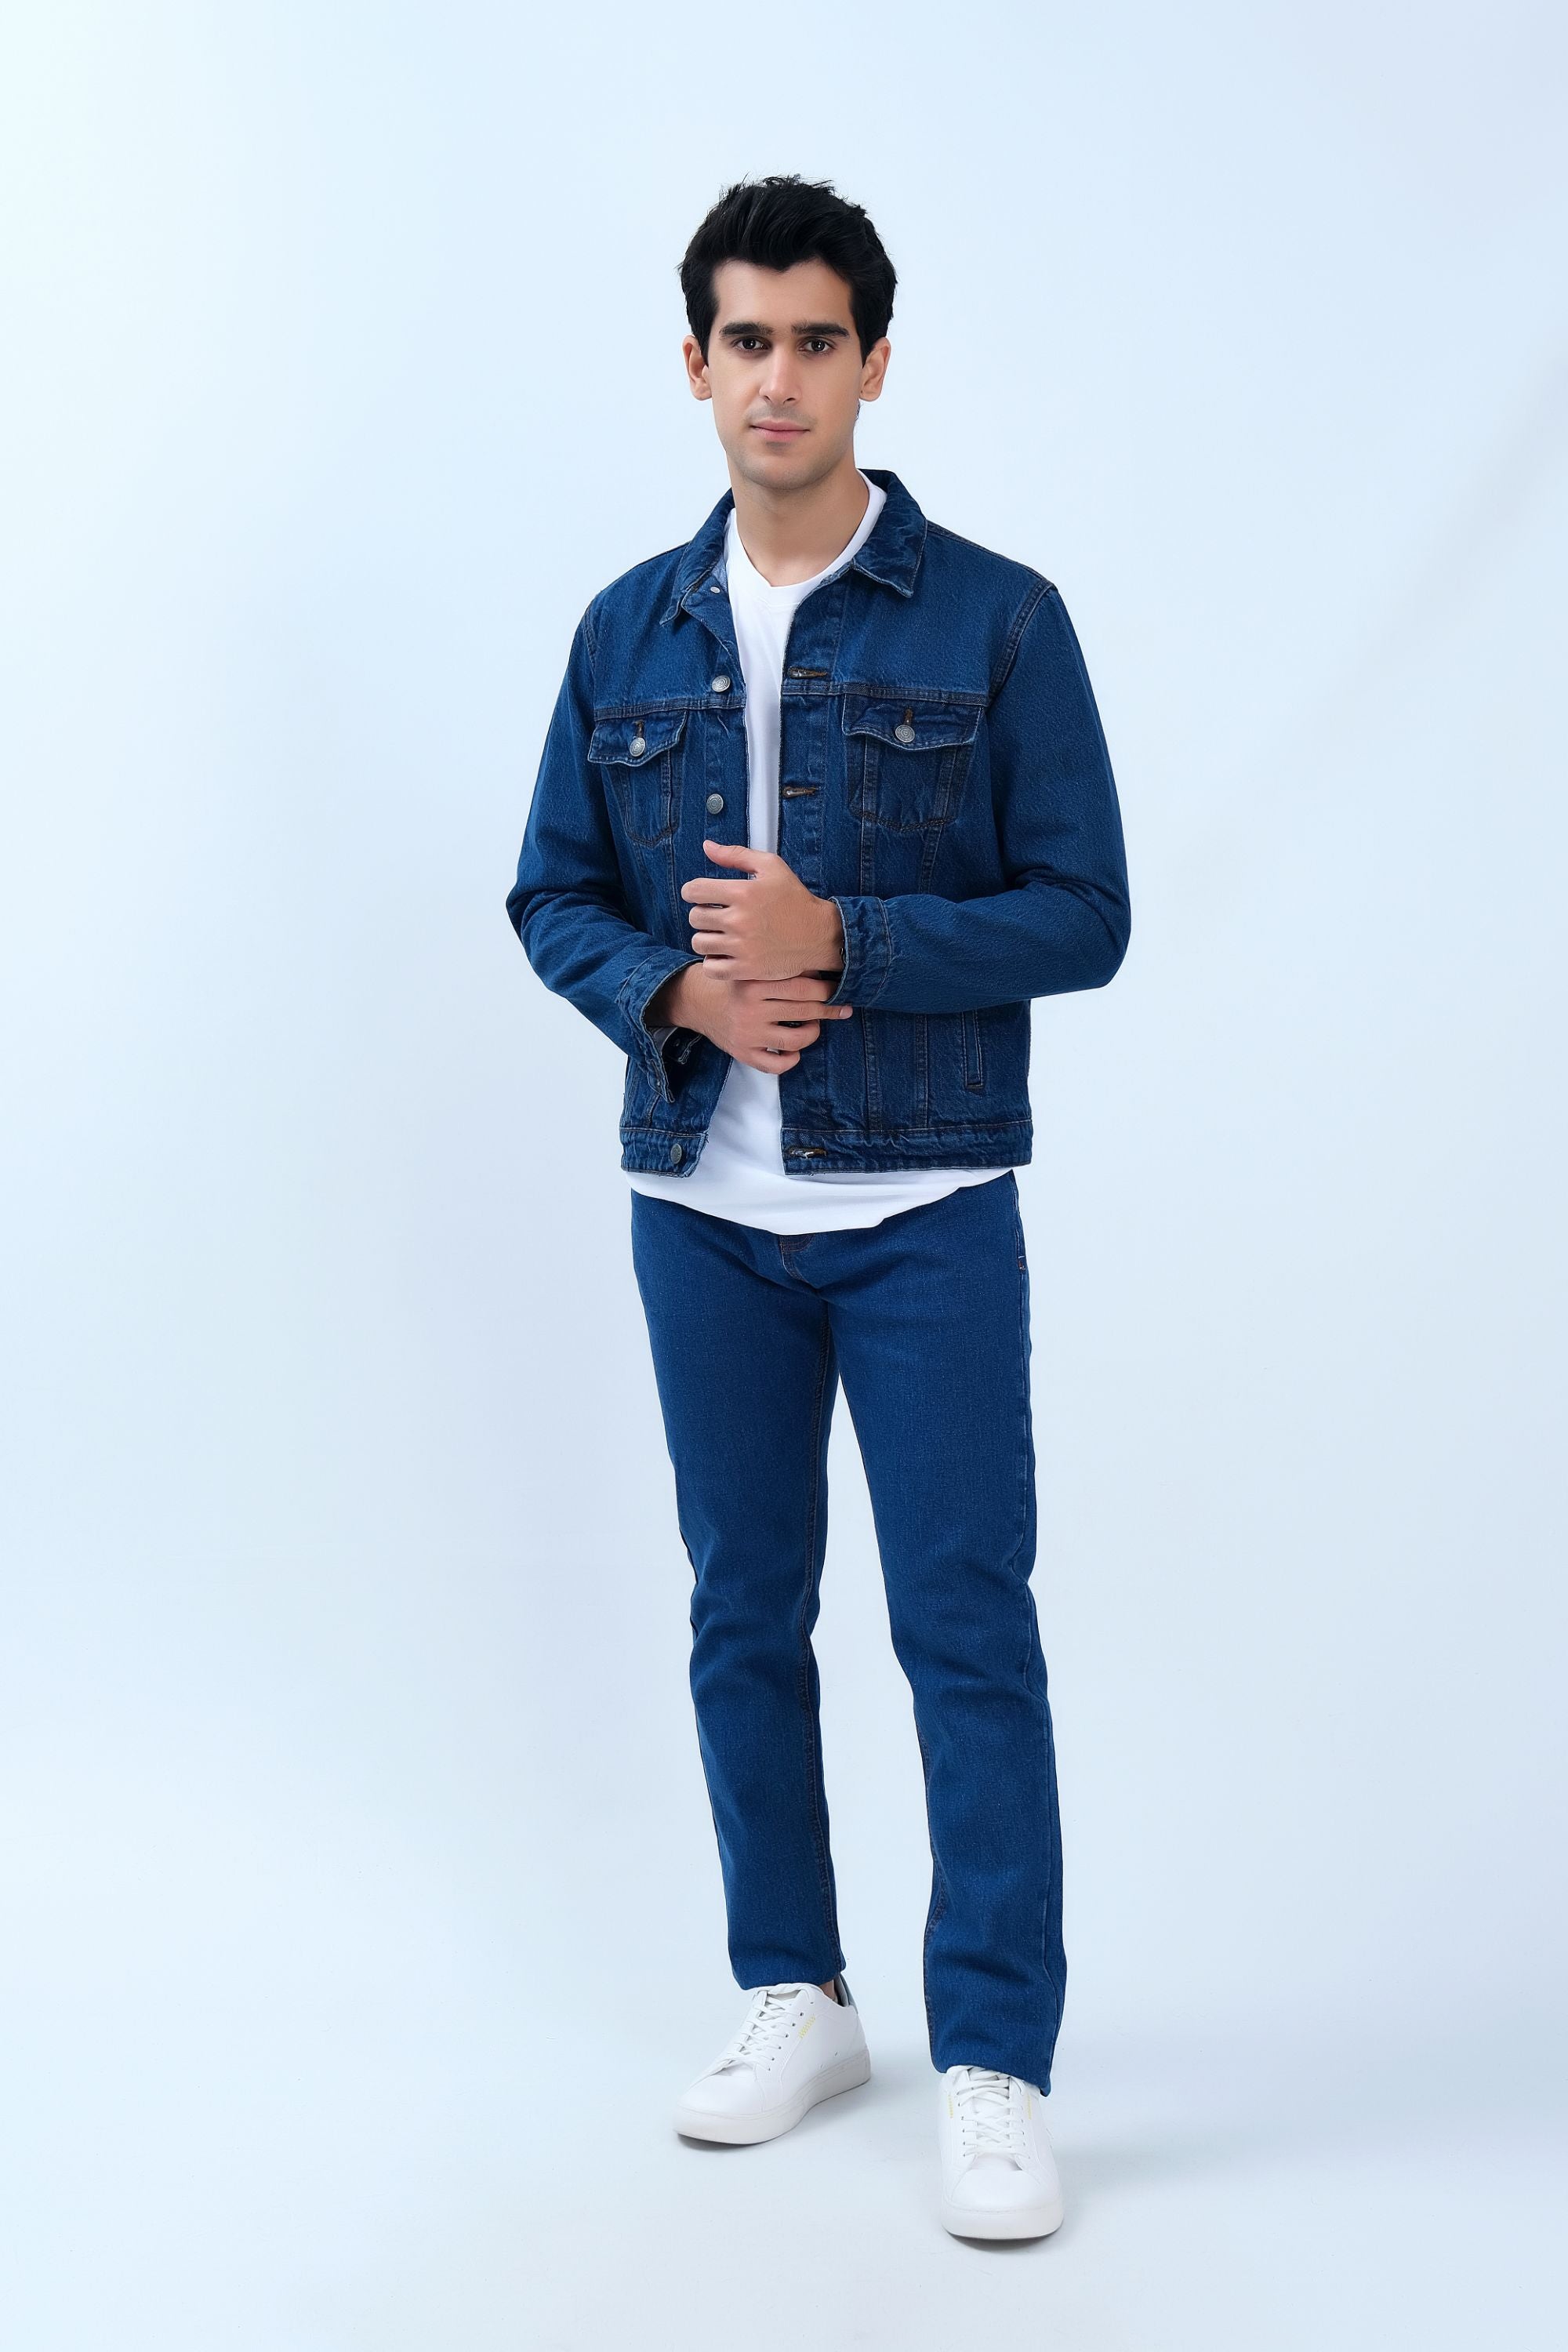 How to Wear a Denim Jacket with Jeans